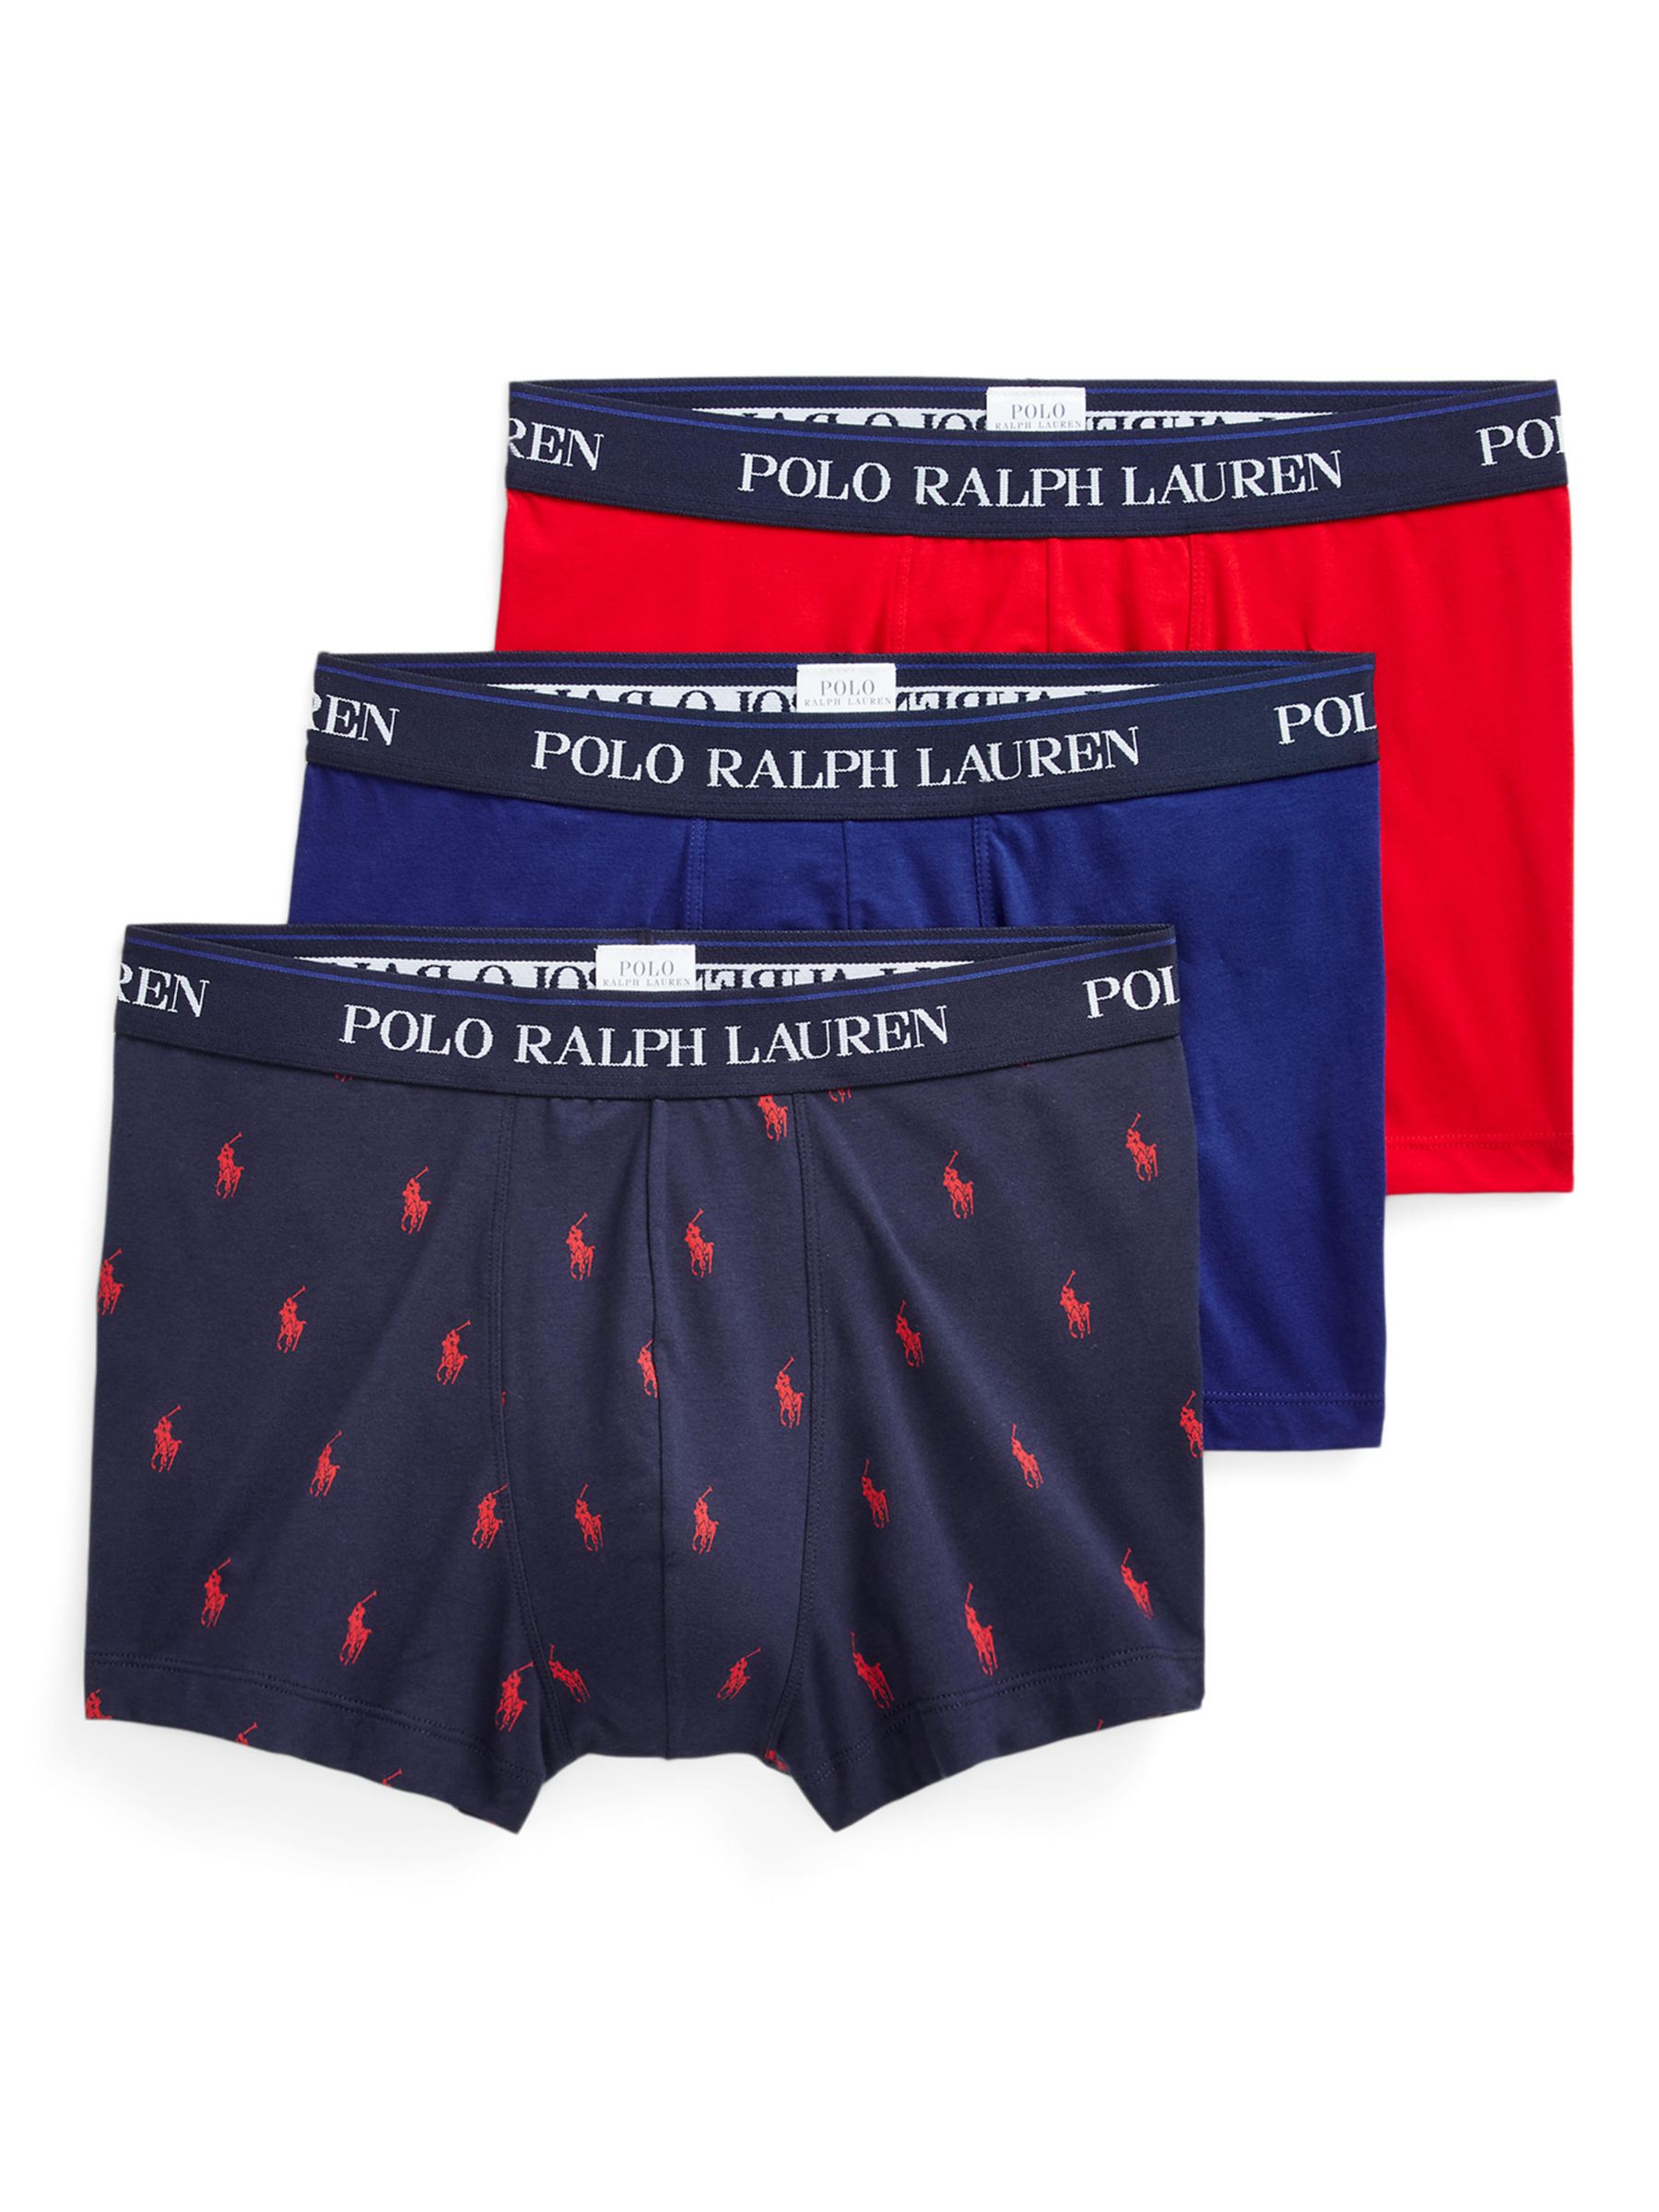 Polo Ralph Lauren Cotton Stretch Trunks, Pack of 3, Blue/Red Multi, S